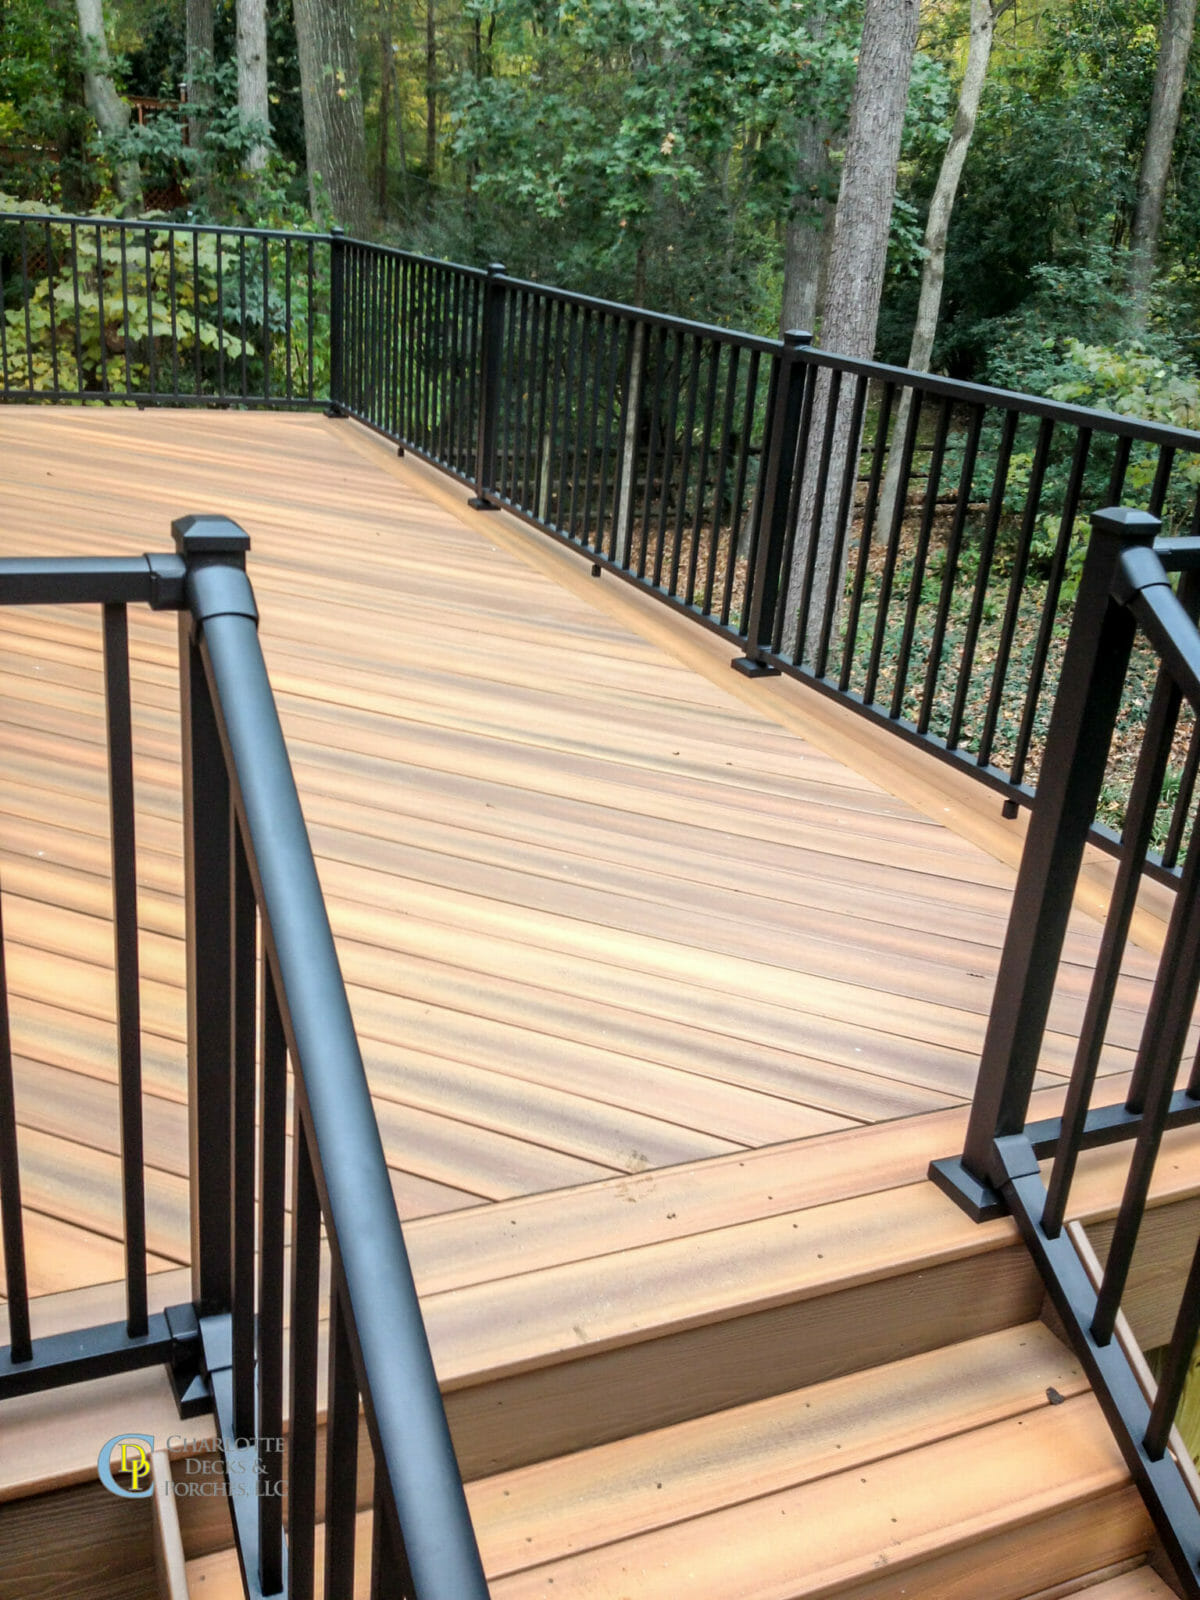 Composite Decking Material for Porch Renovation | CDP